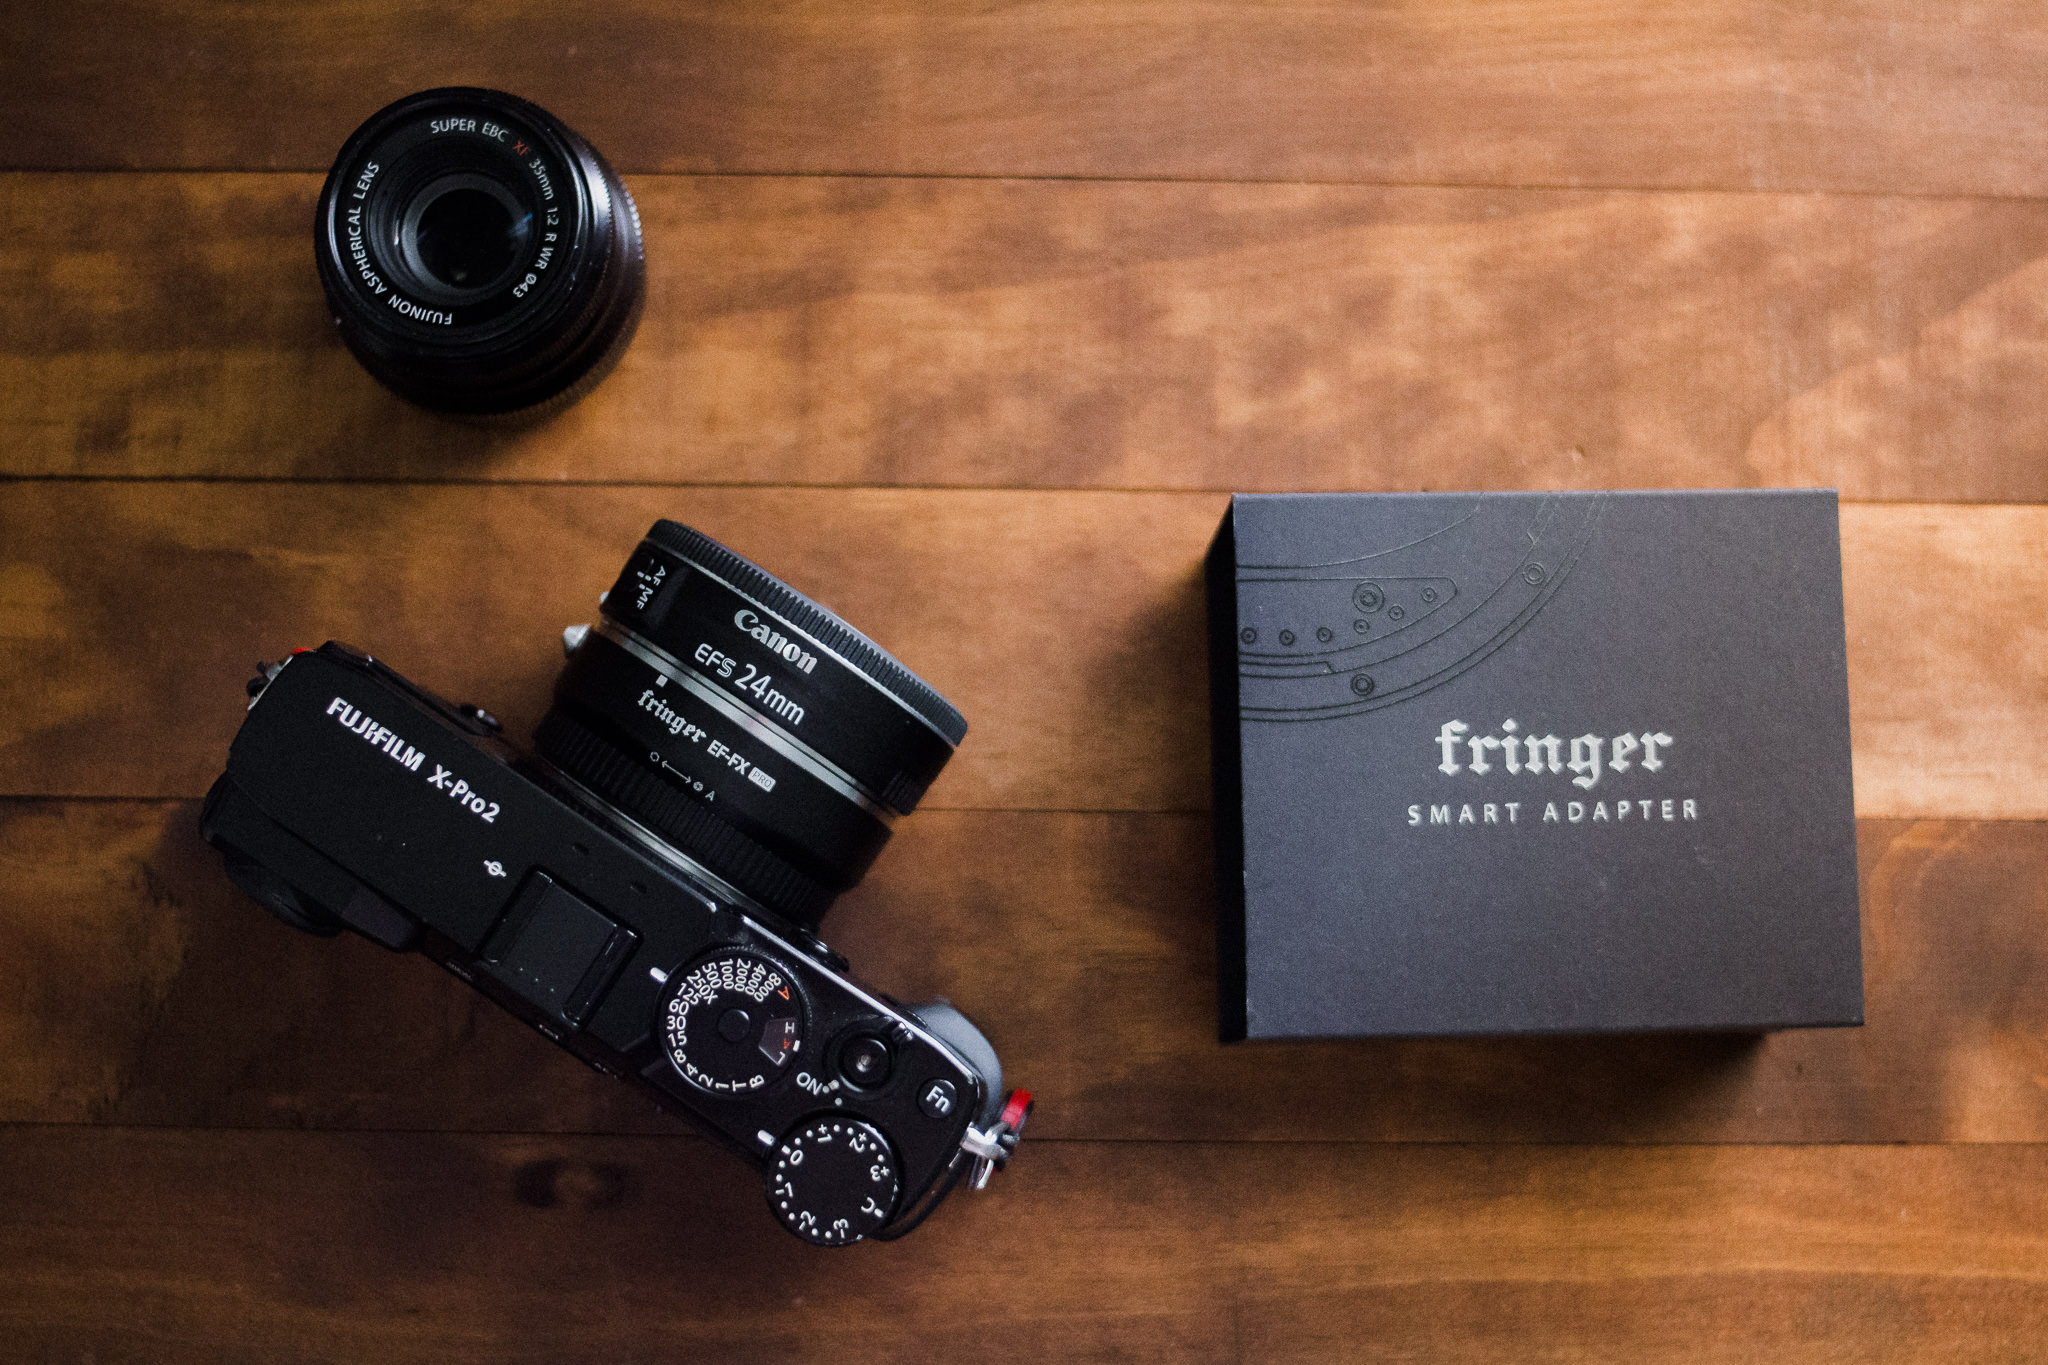 Fringer nf-fx smart adapter compatible with Nikon F to Fujfilm X Fuji X-T3 T4 X-Pro3 XT30 X-H1 X-T100 X-T200 X-S10 Sigma Tamron